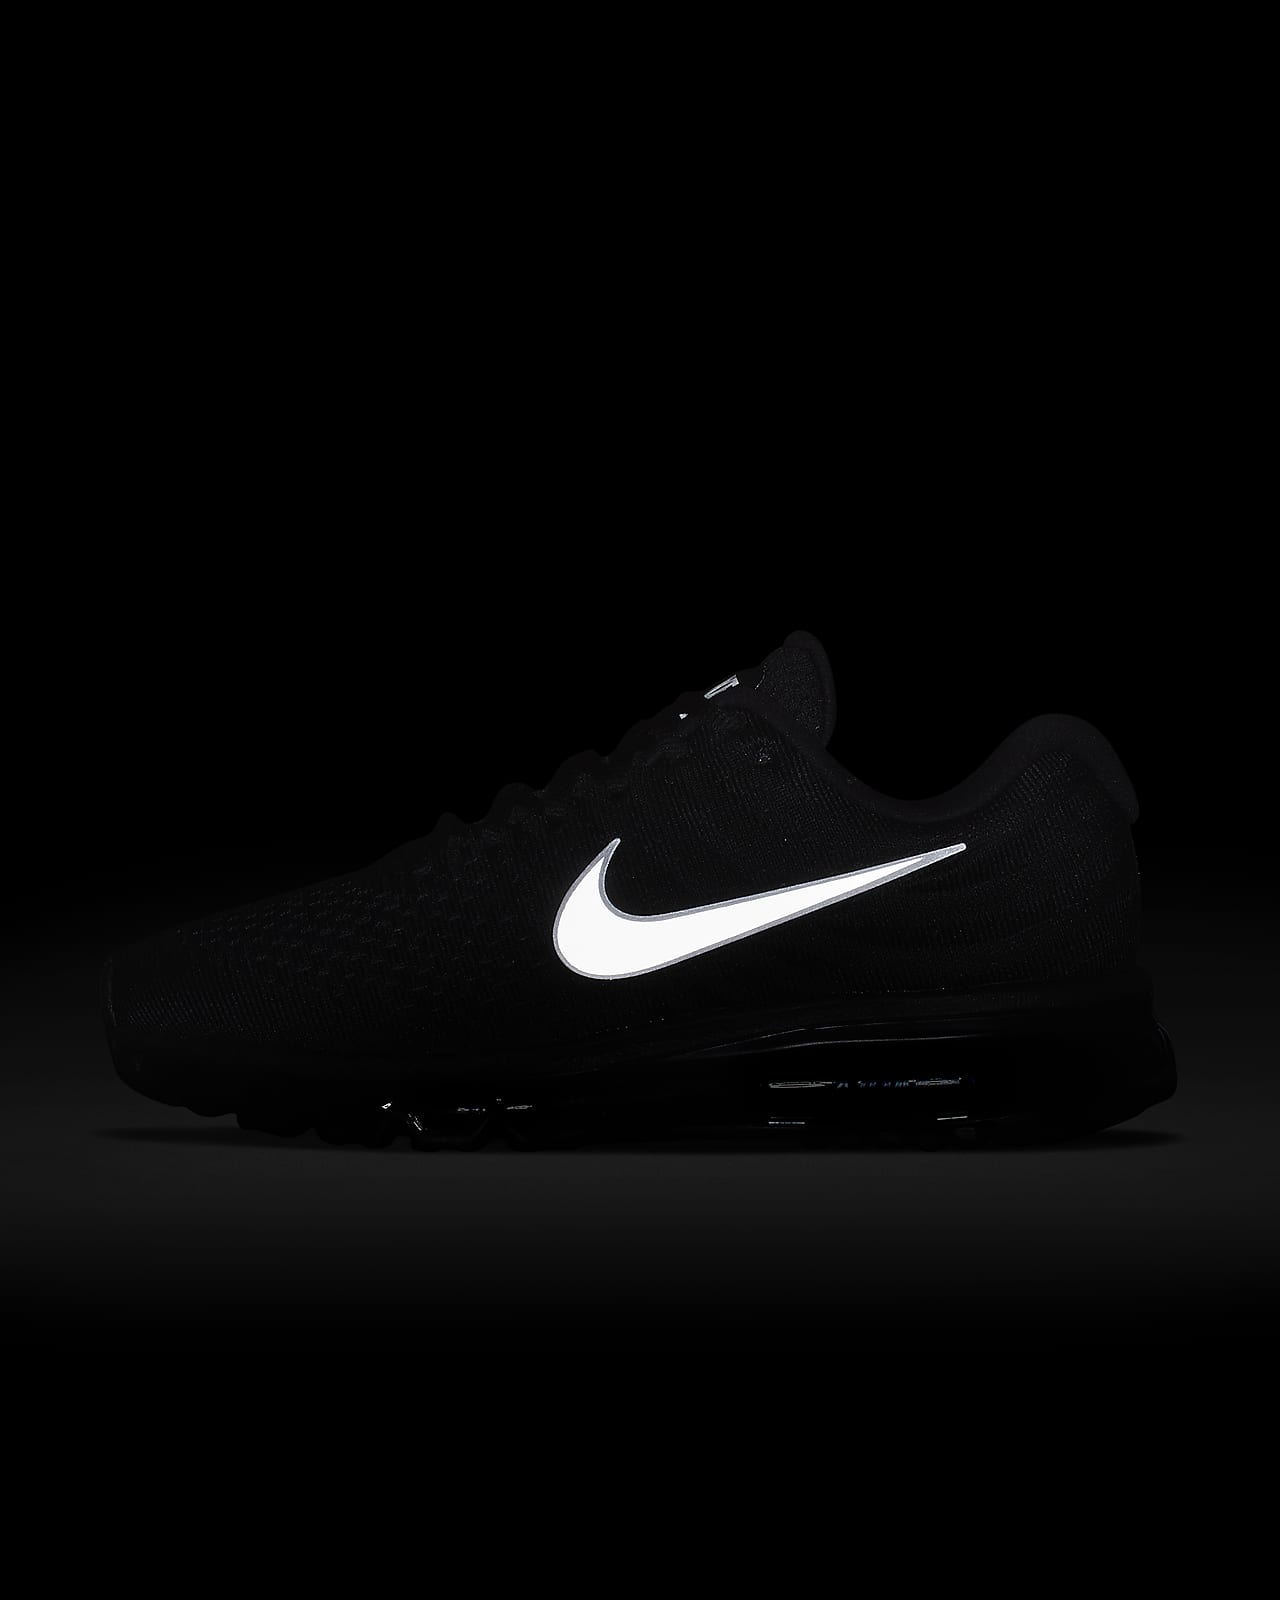 leadership Identify Controversy Nike Air Max 2017 Men's Shoes. Nike JP